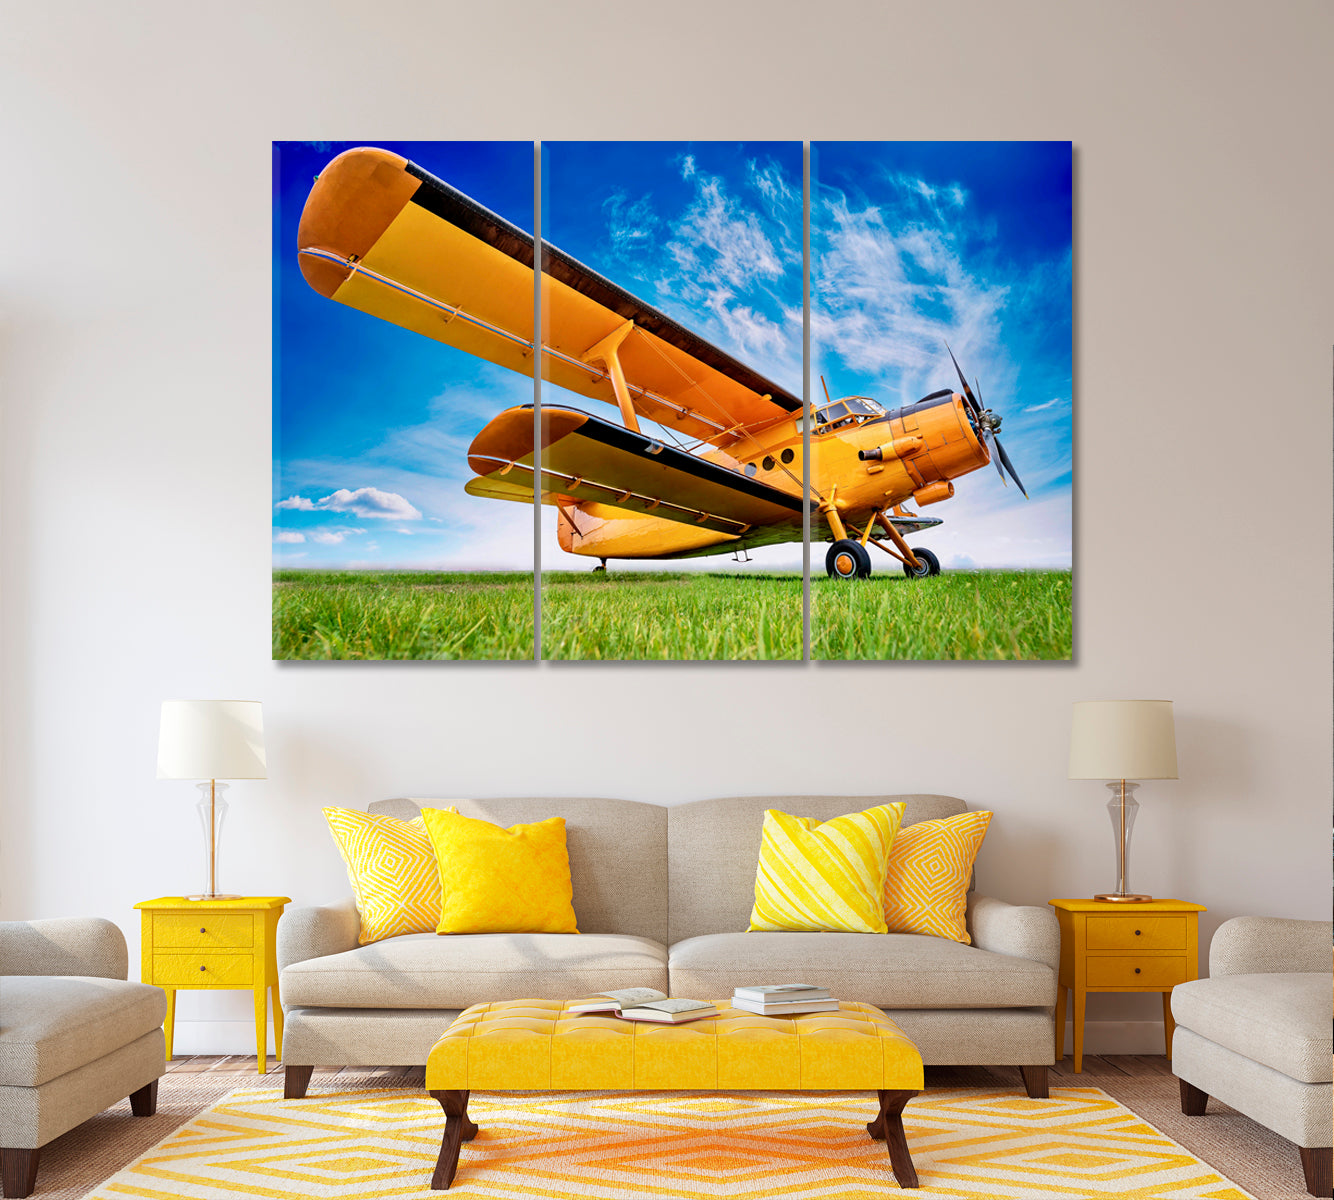 Old Yellow Biplane with Blue Sky Canvas Print ArtLexy 3 Panels 36"x24" inches 